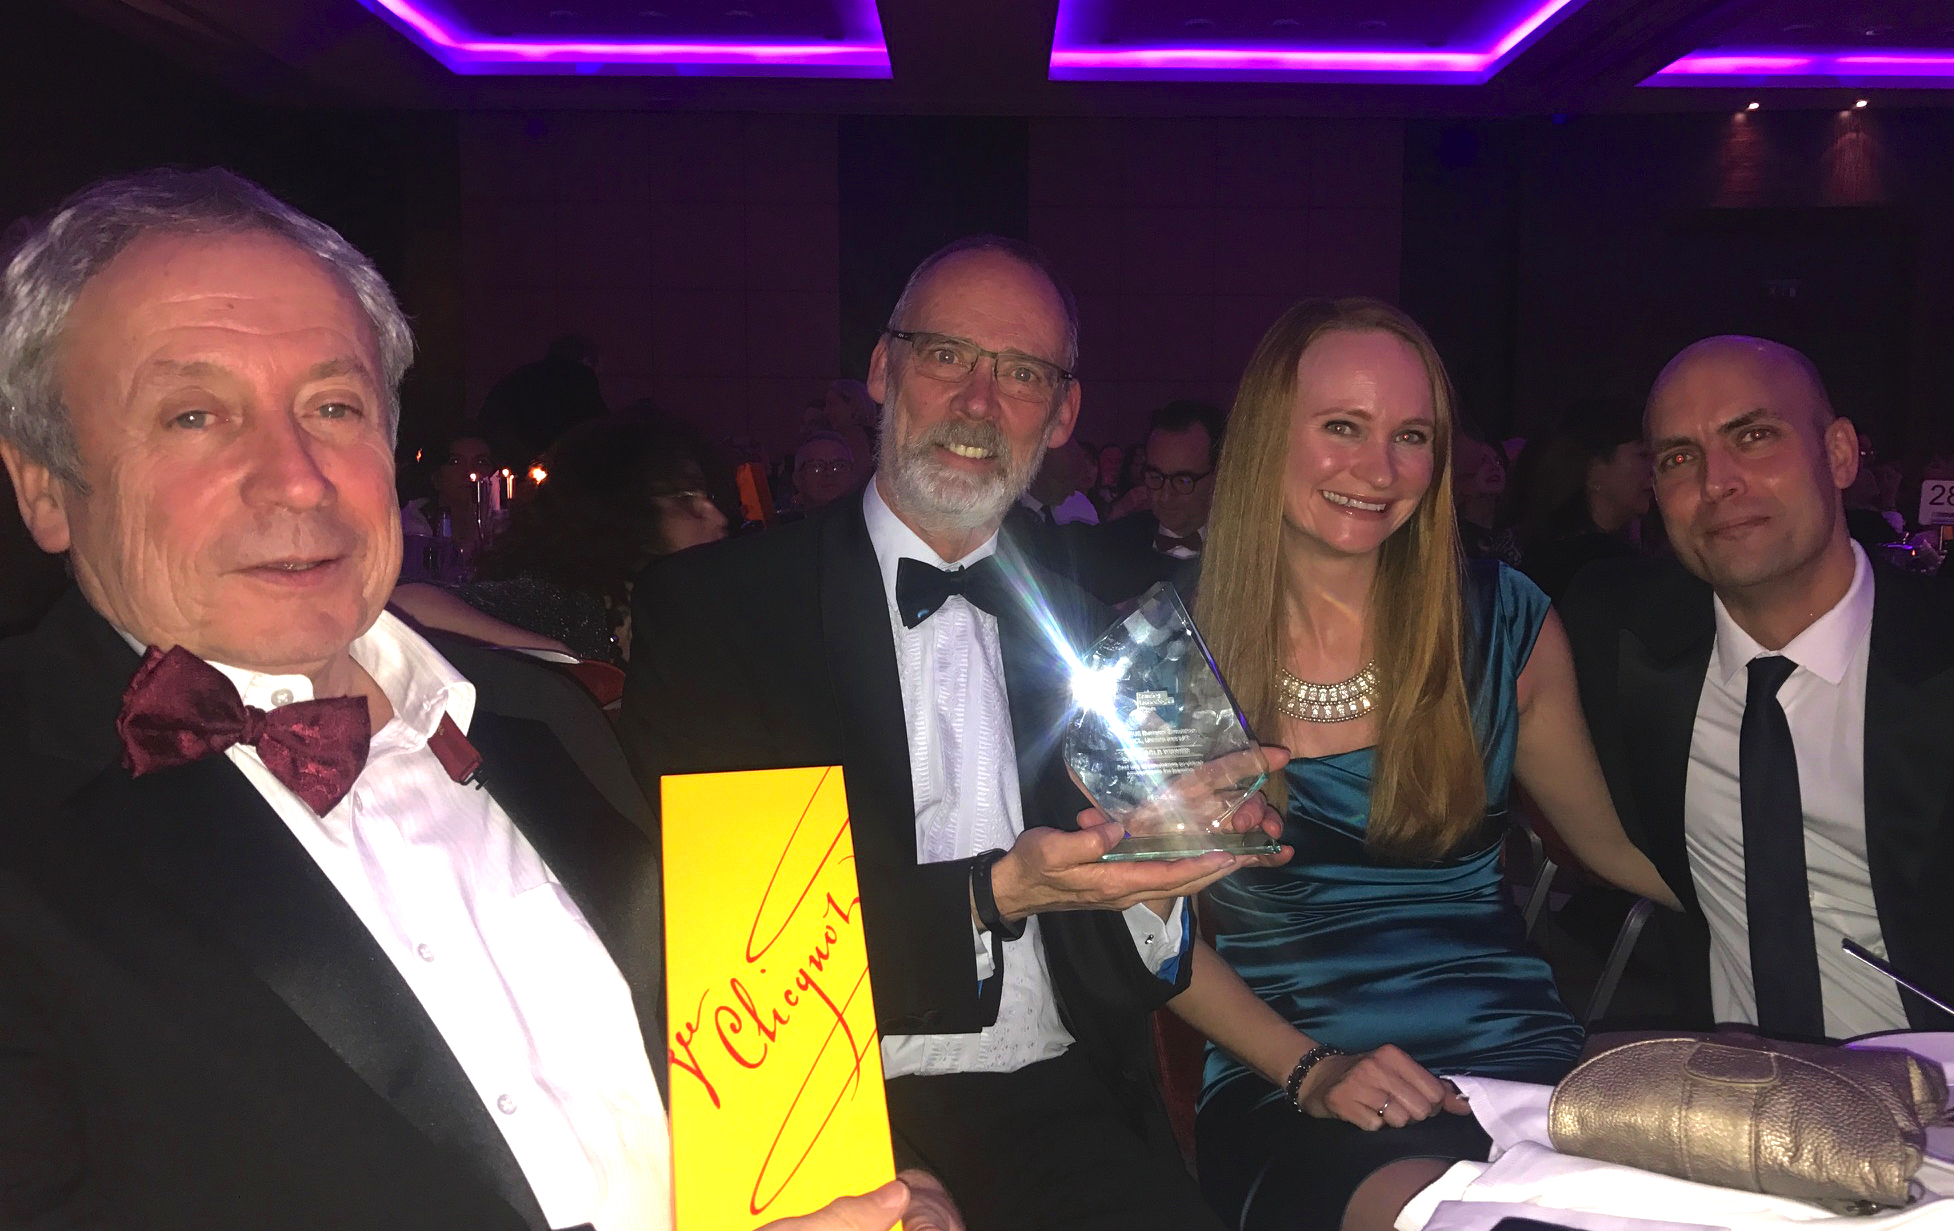 Unicorn, with partners the University of London and Learning Age Solutions Ltd (LAS), celebrated winning the Gold Award for Best Use of Simulations or Virtual Environments at the Learning Technologies Awards in November 2017. (l-r) Alan Parkinson (Deputy Director (Education), UCL School of Management), Peter Phillips (CEO, Unicorn), Tess Robinson (Director, LAS) and Rob Hubbard (Managing Director, LAS)